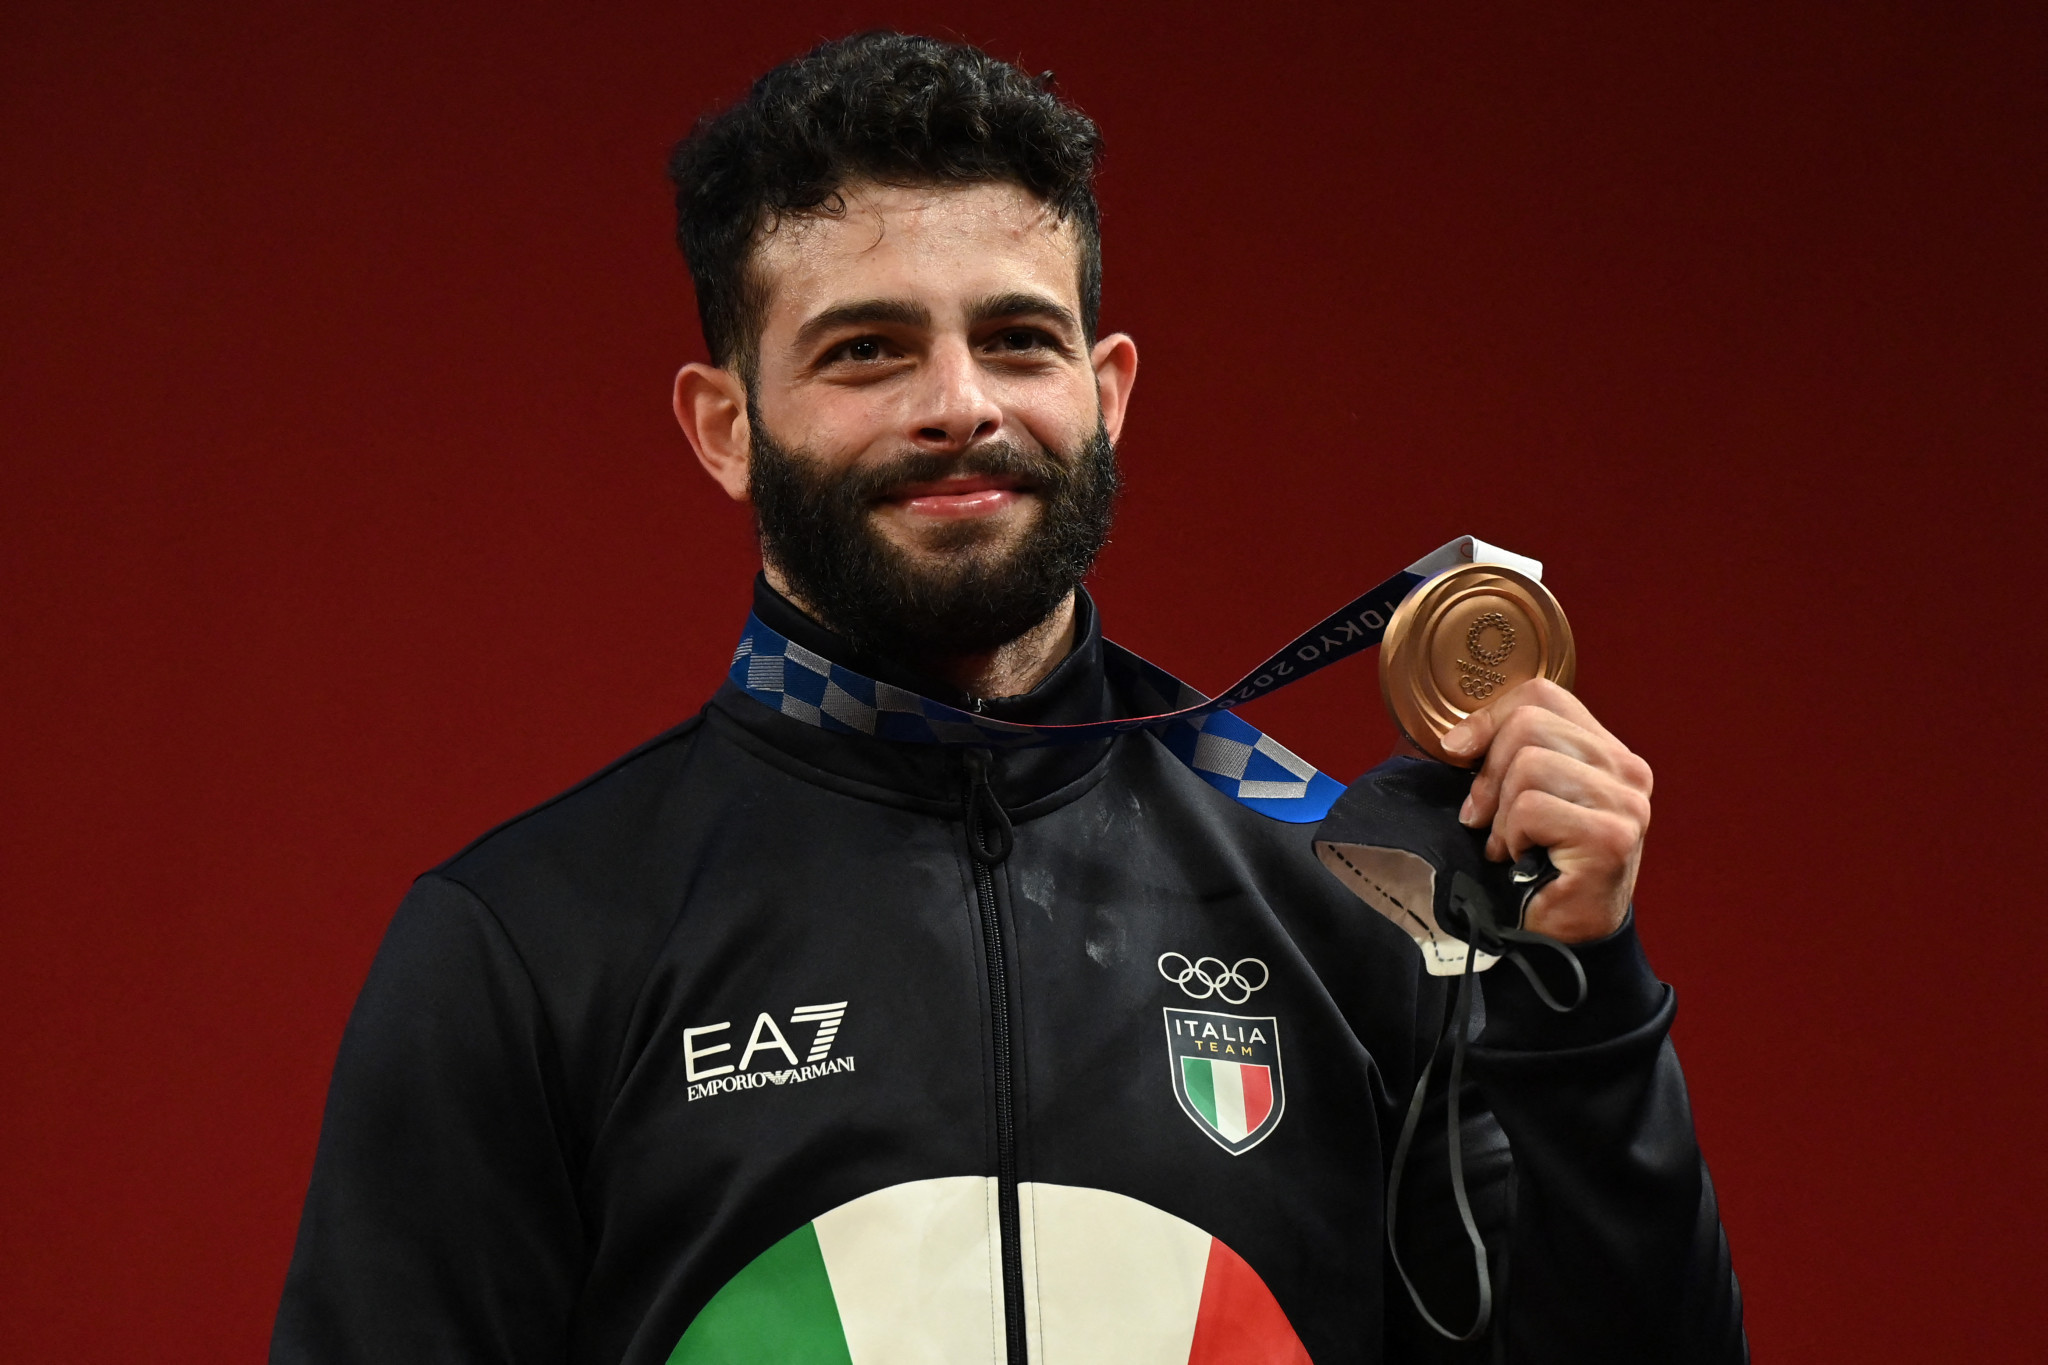 Antonio Pizzolato with his Tokyo 2020 bronze medal. GETTY IMAGES